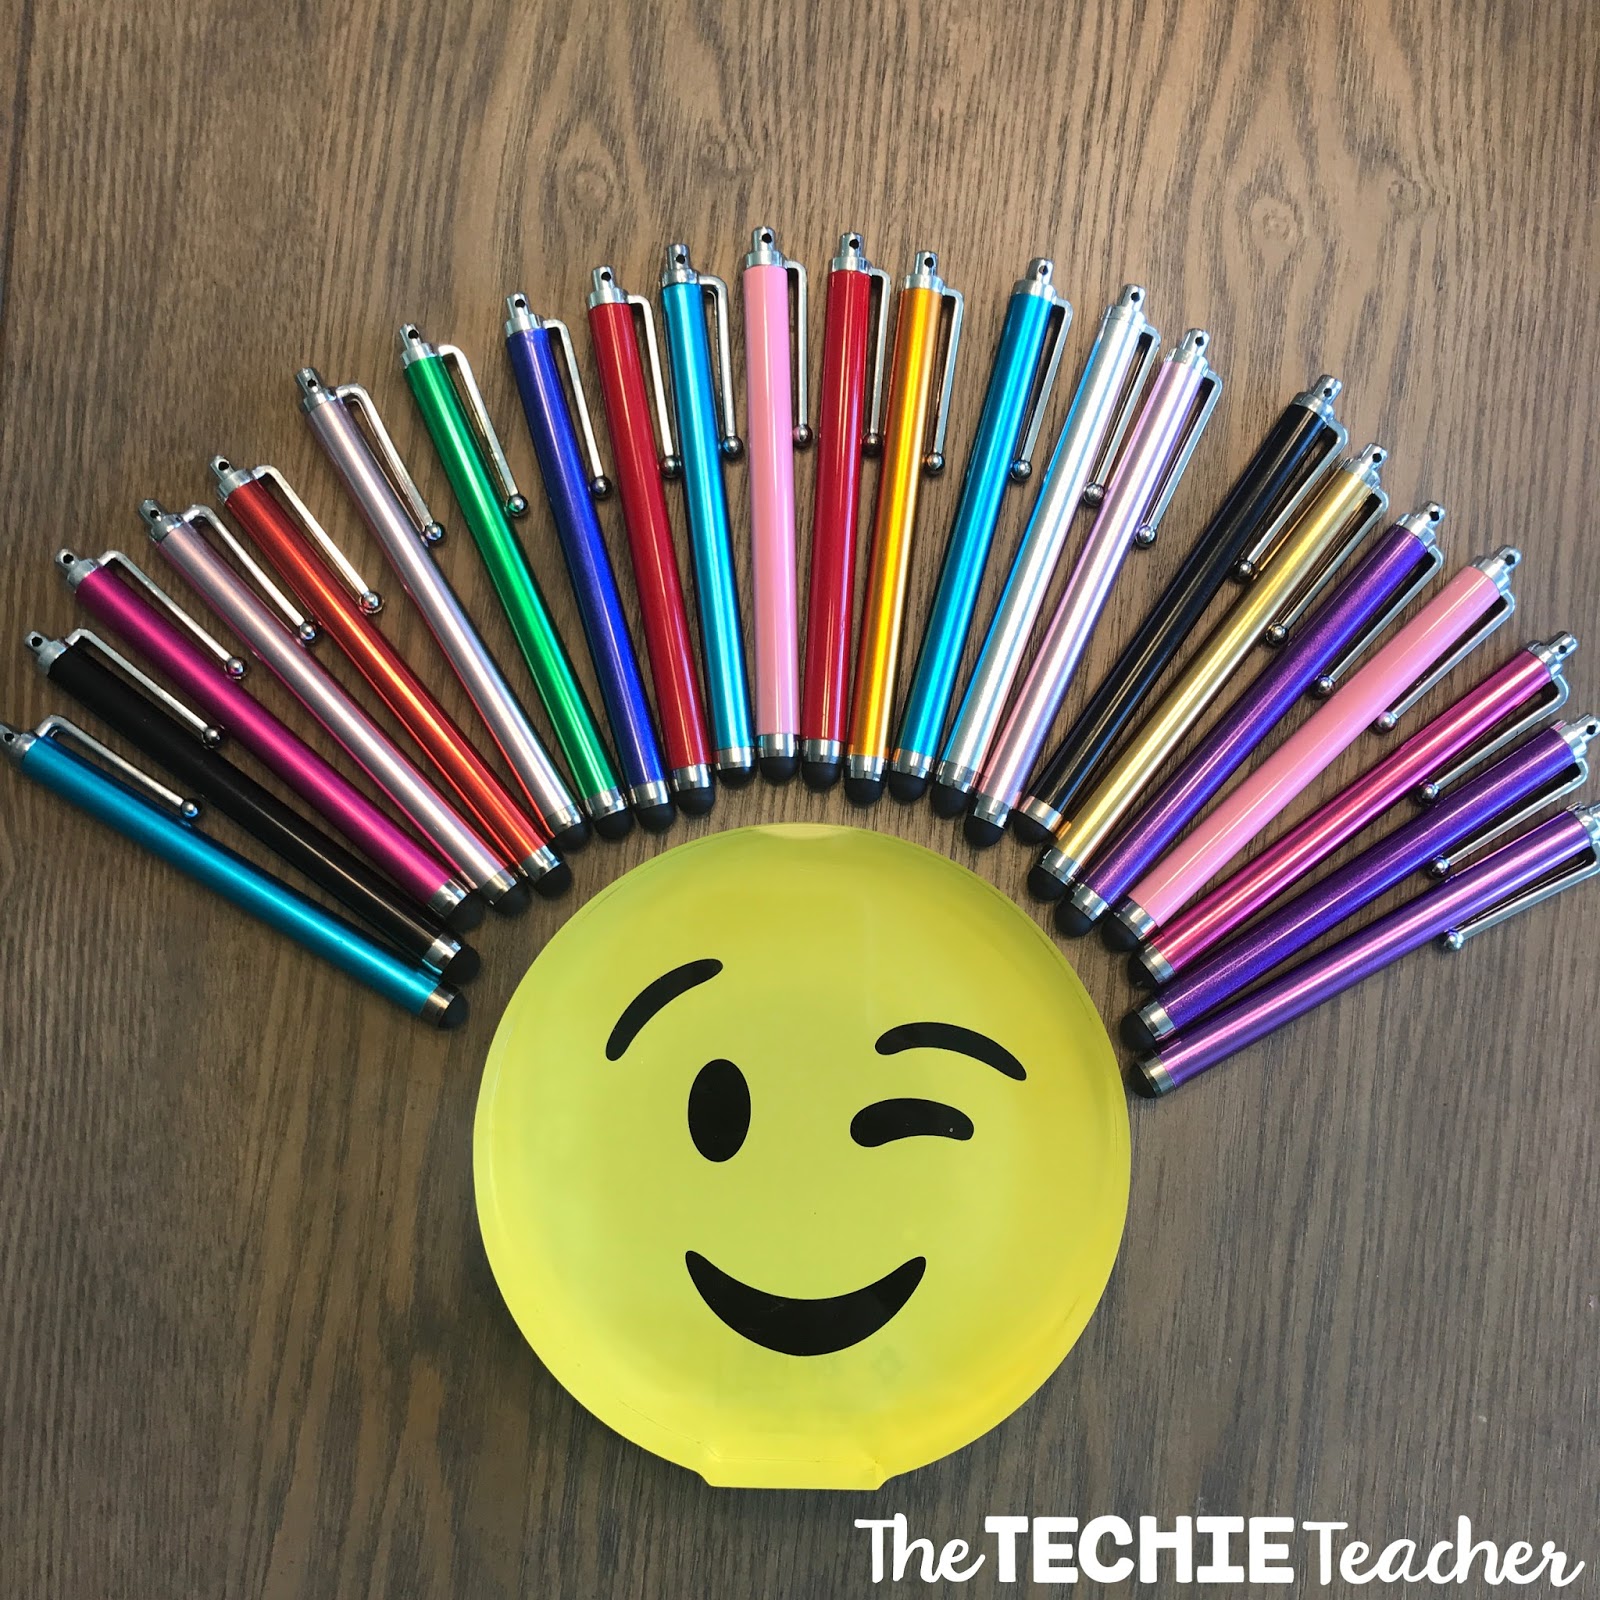 Affordable Stylus Pens for the Elementary Classroom